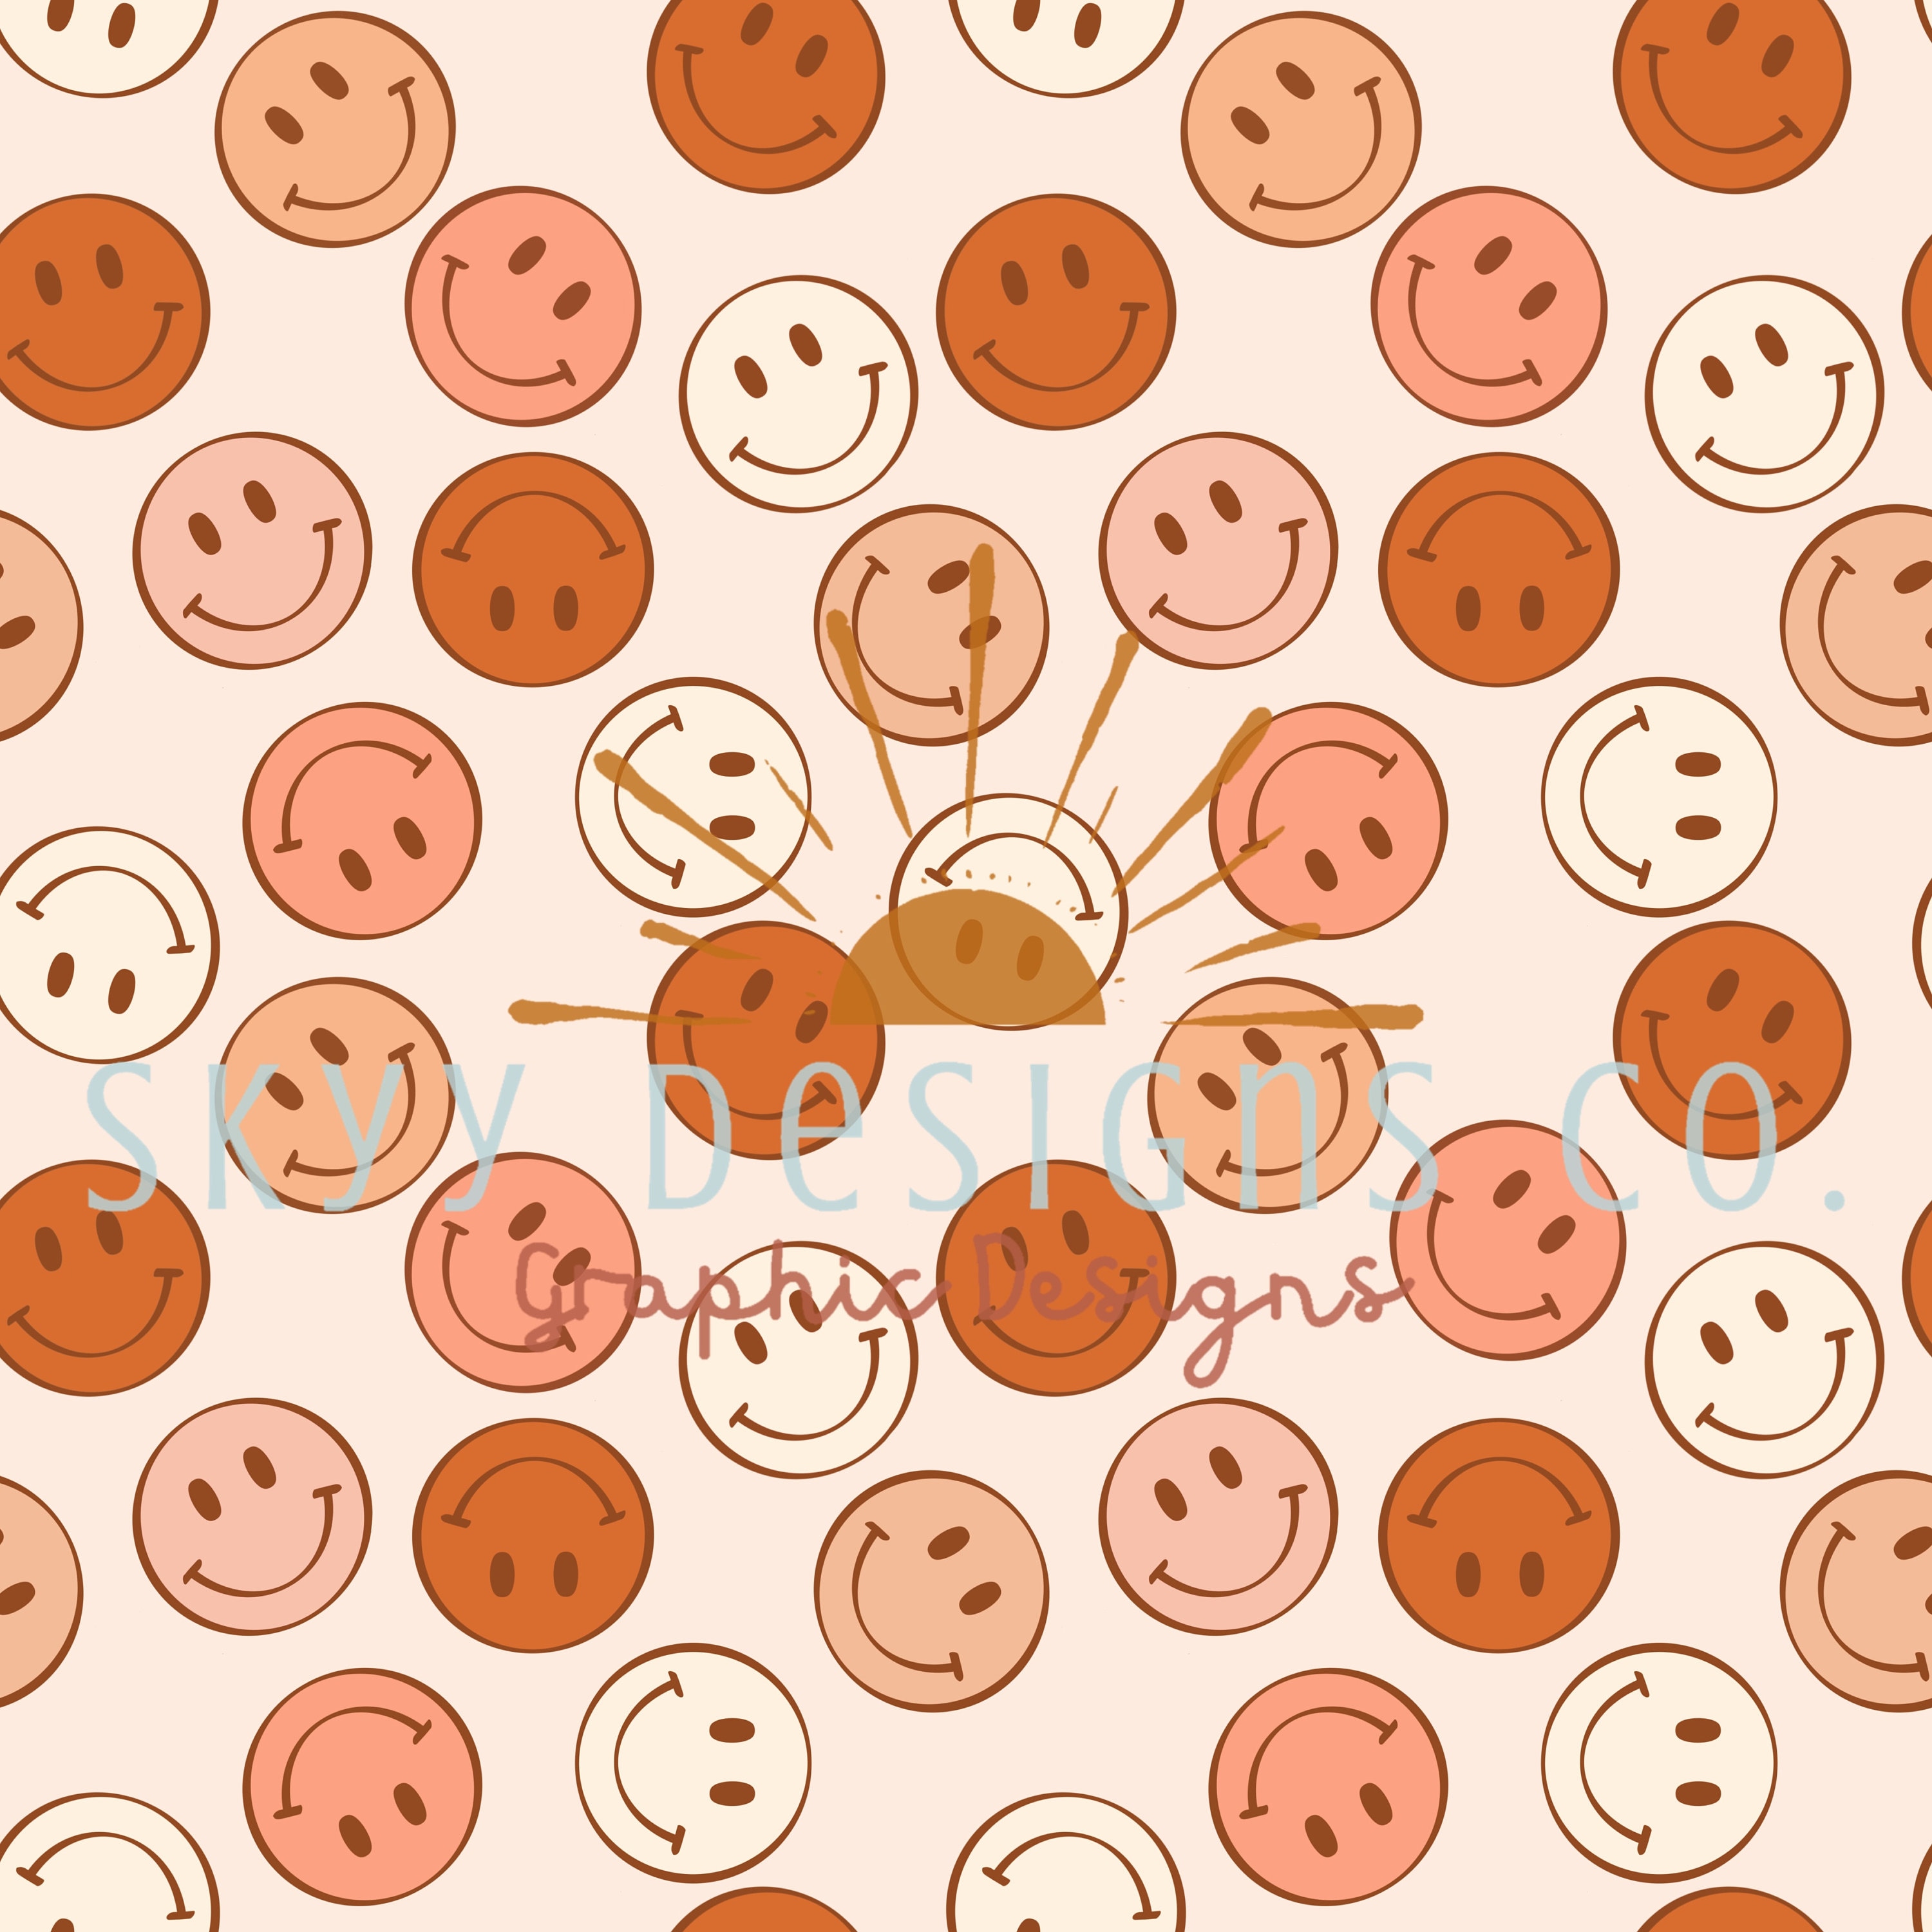 Neutral Smiley Face Digital Seamless Pattern for Fabrics and